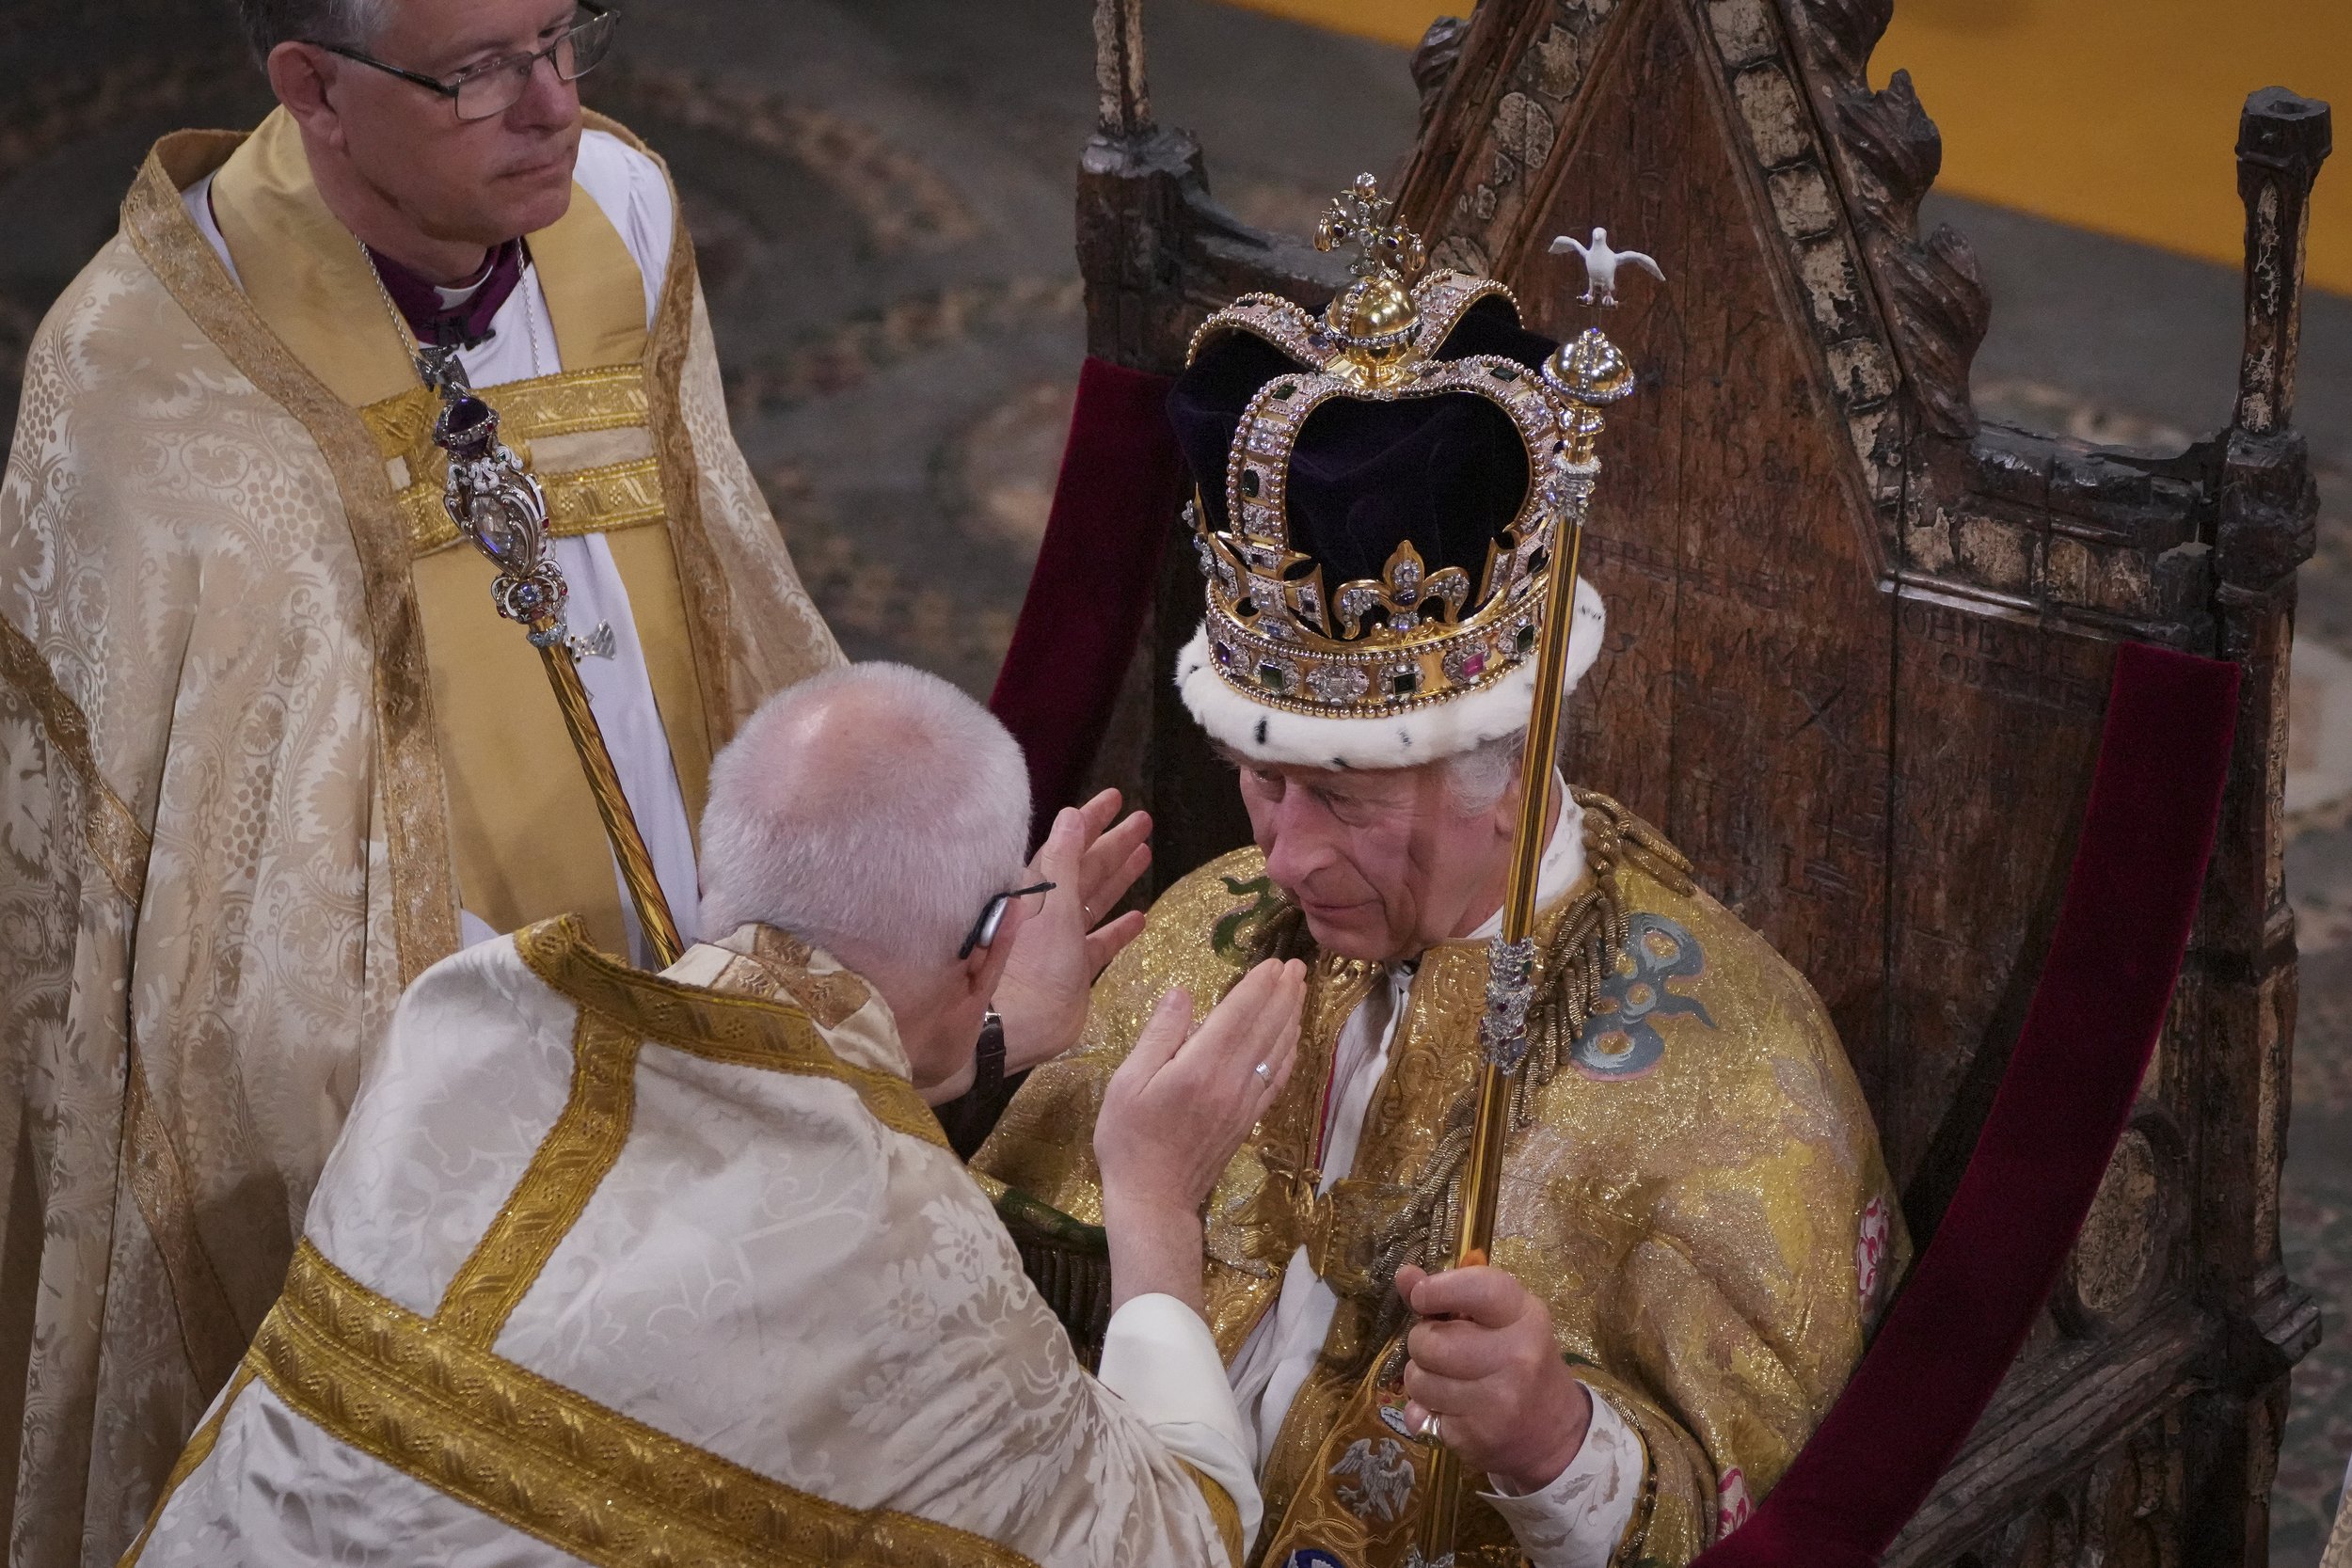  King Charles III, seated in St Edward's Chair, also known as the Coronation Chair, is crowned with St Edward's Crown by The Archbishop of Canterbury the Most Reverend Justin Welby during his coronation ceremony in Westminster Abbey, London. The King